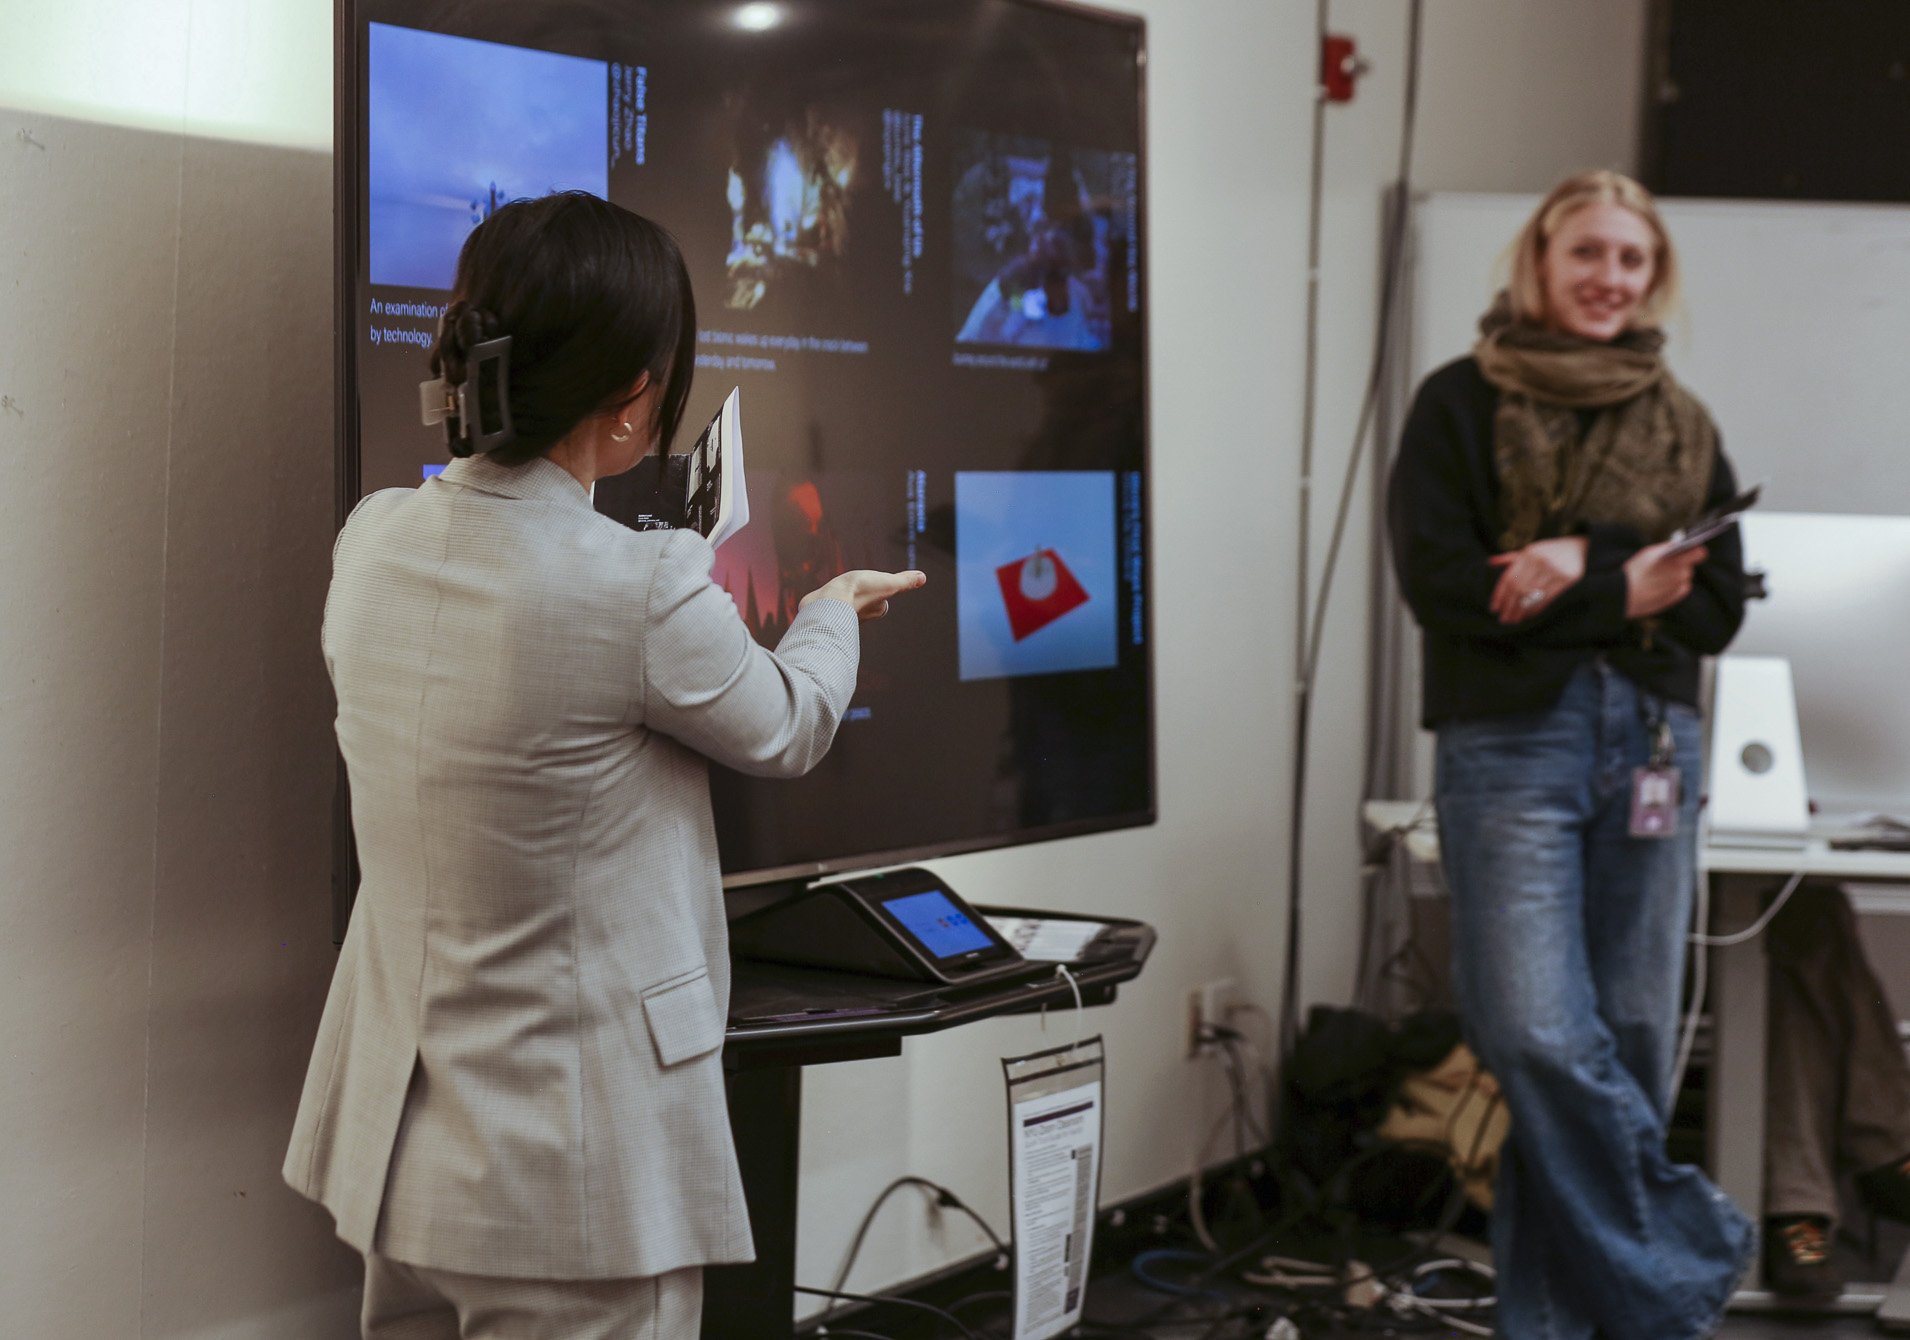 Professor Snow Fu and student Cora Rafe both stand near a television